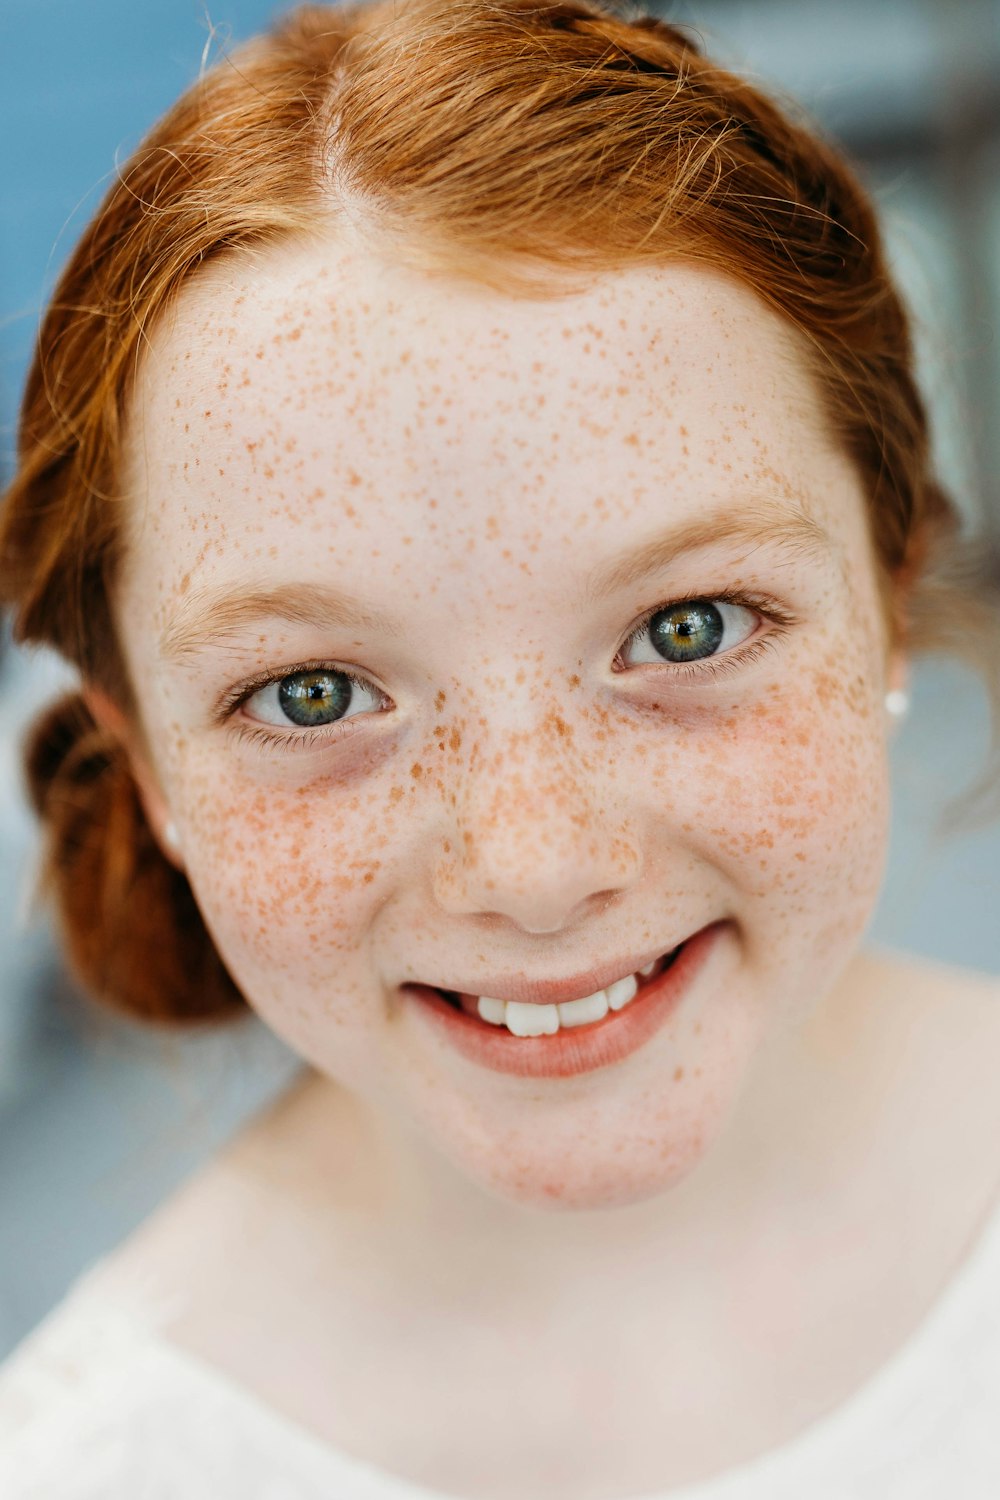 a young girl with freckles on her face